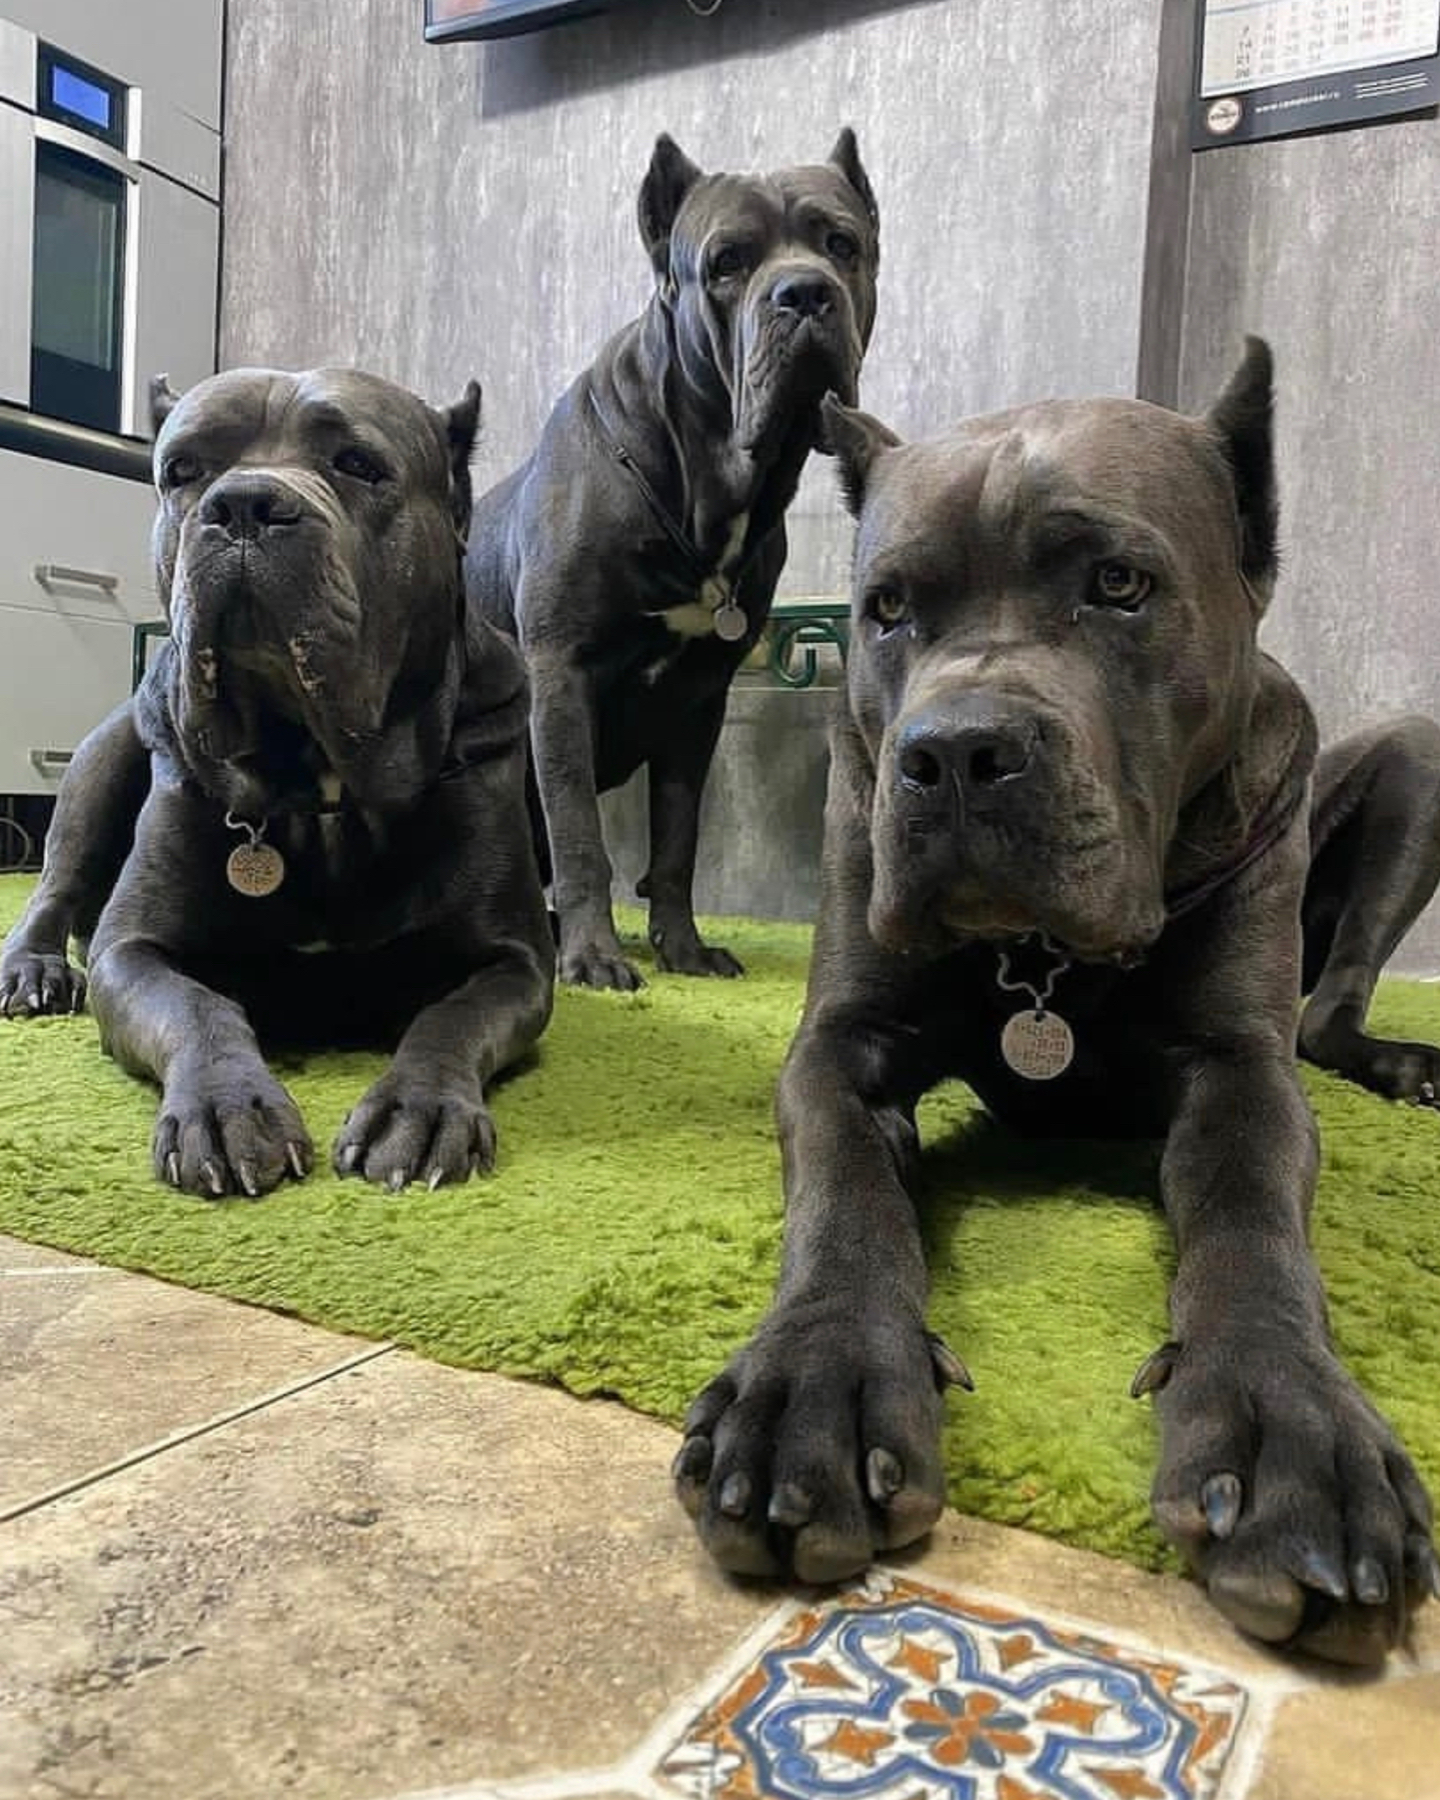 Three Cane Corsos laying around while their owners wonders: Are Cane Corsos good family dogs?